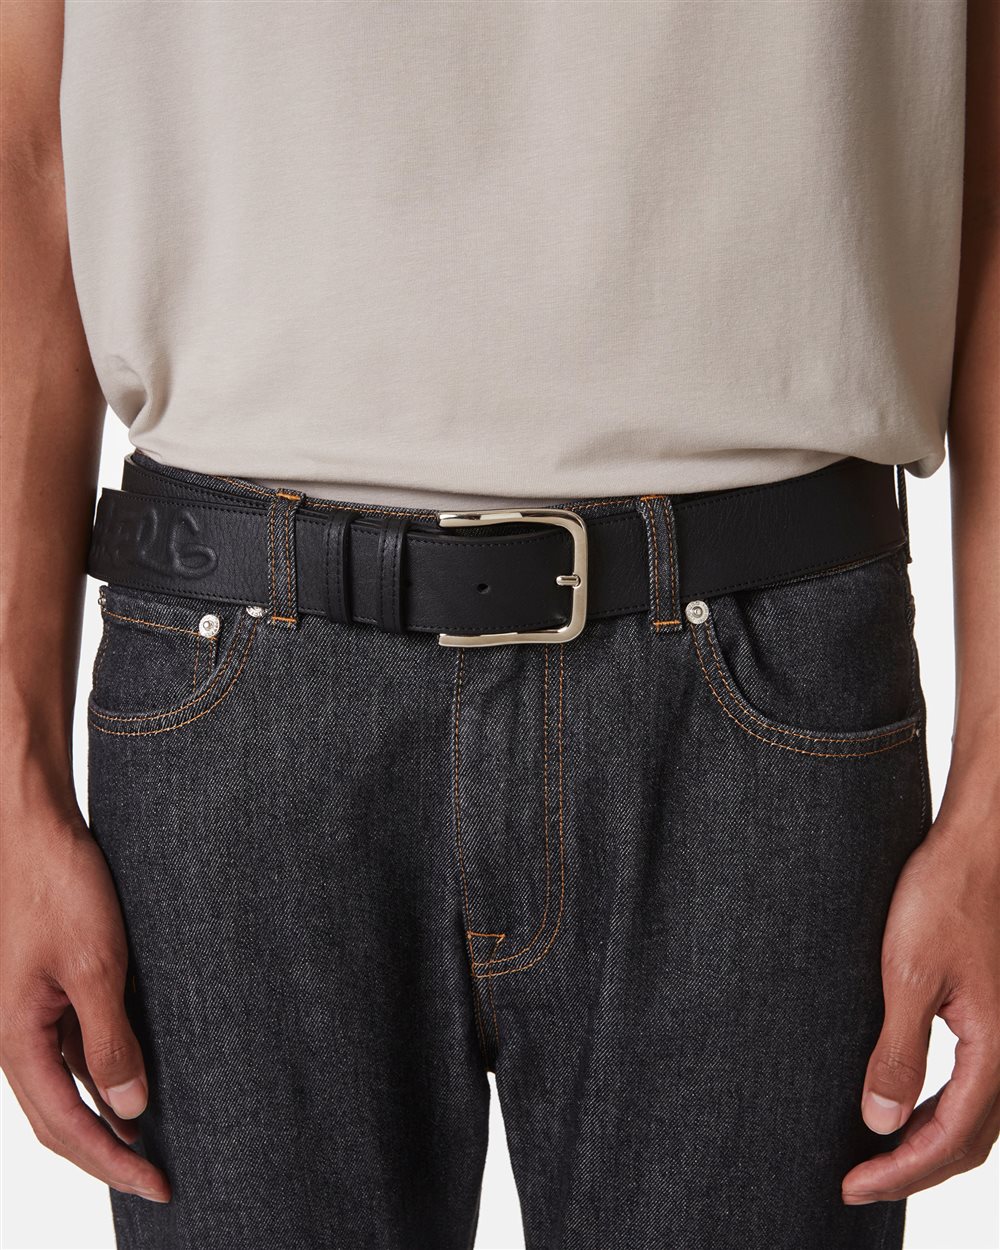 Leather belt with buckle and logo | Iceberg